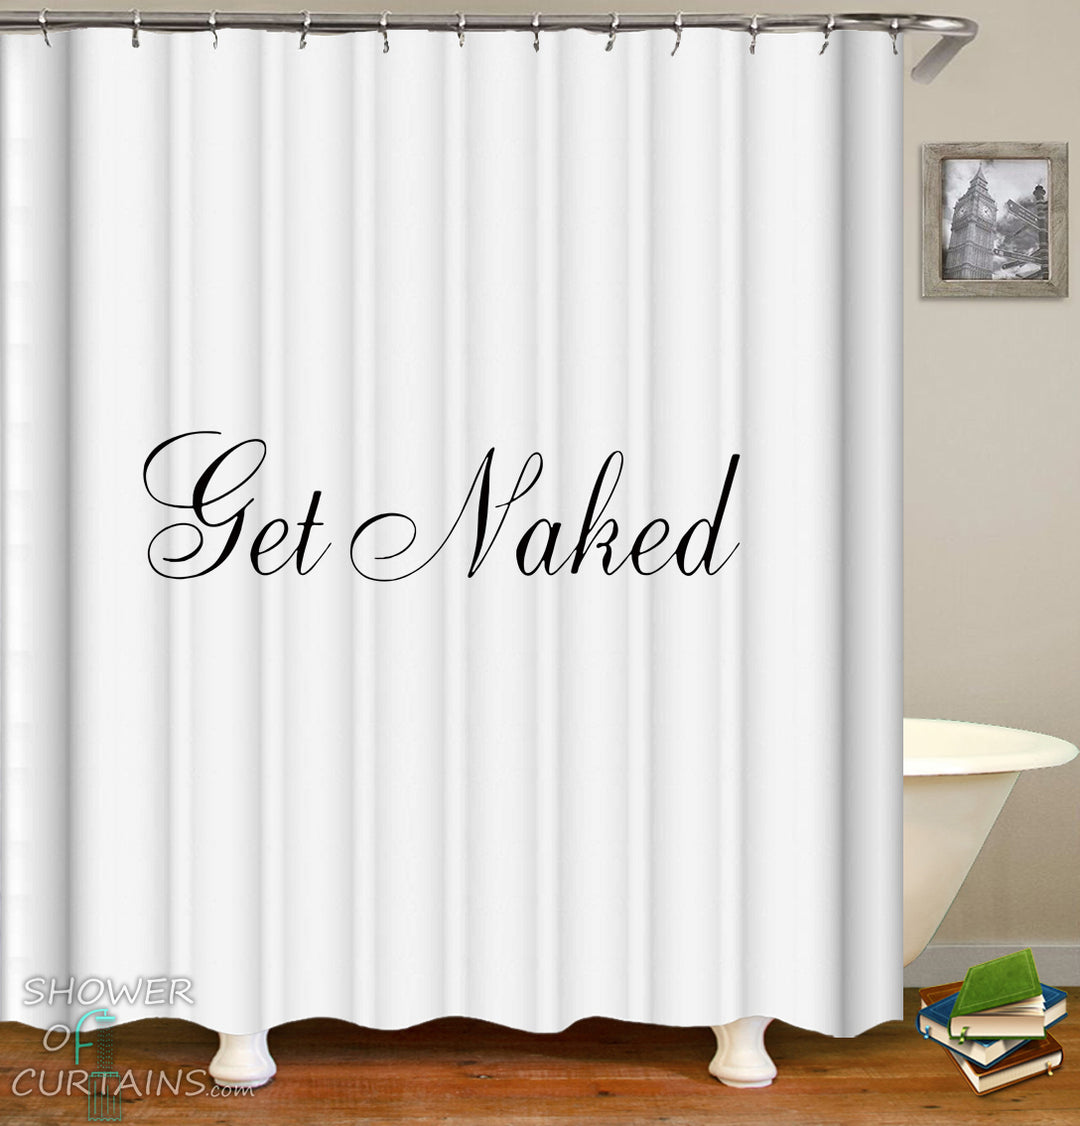 Fancy Get Naked Shower Curtain